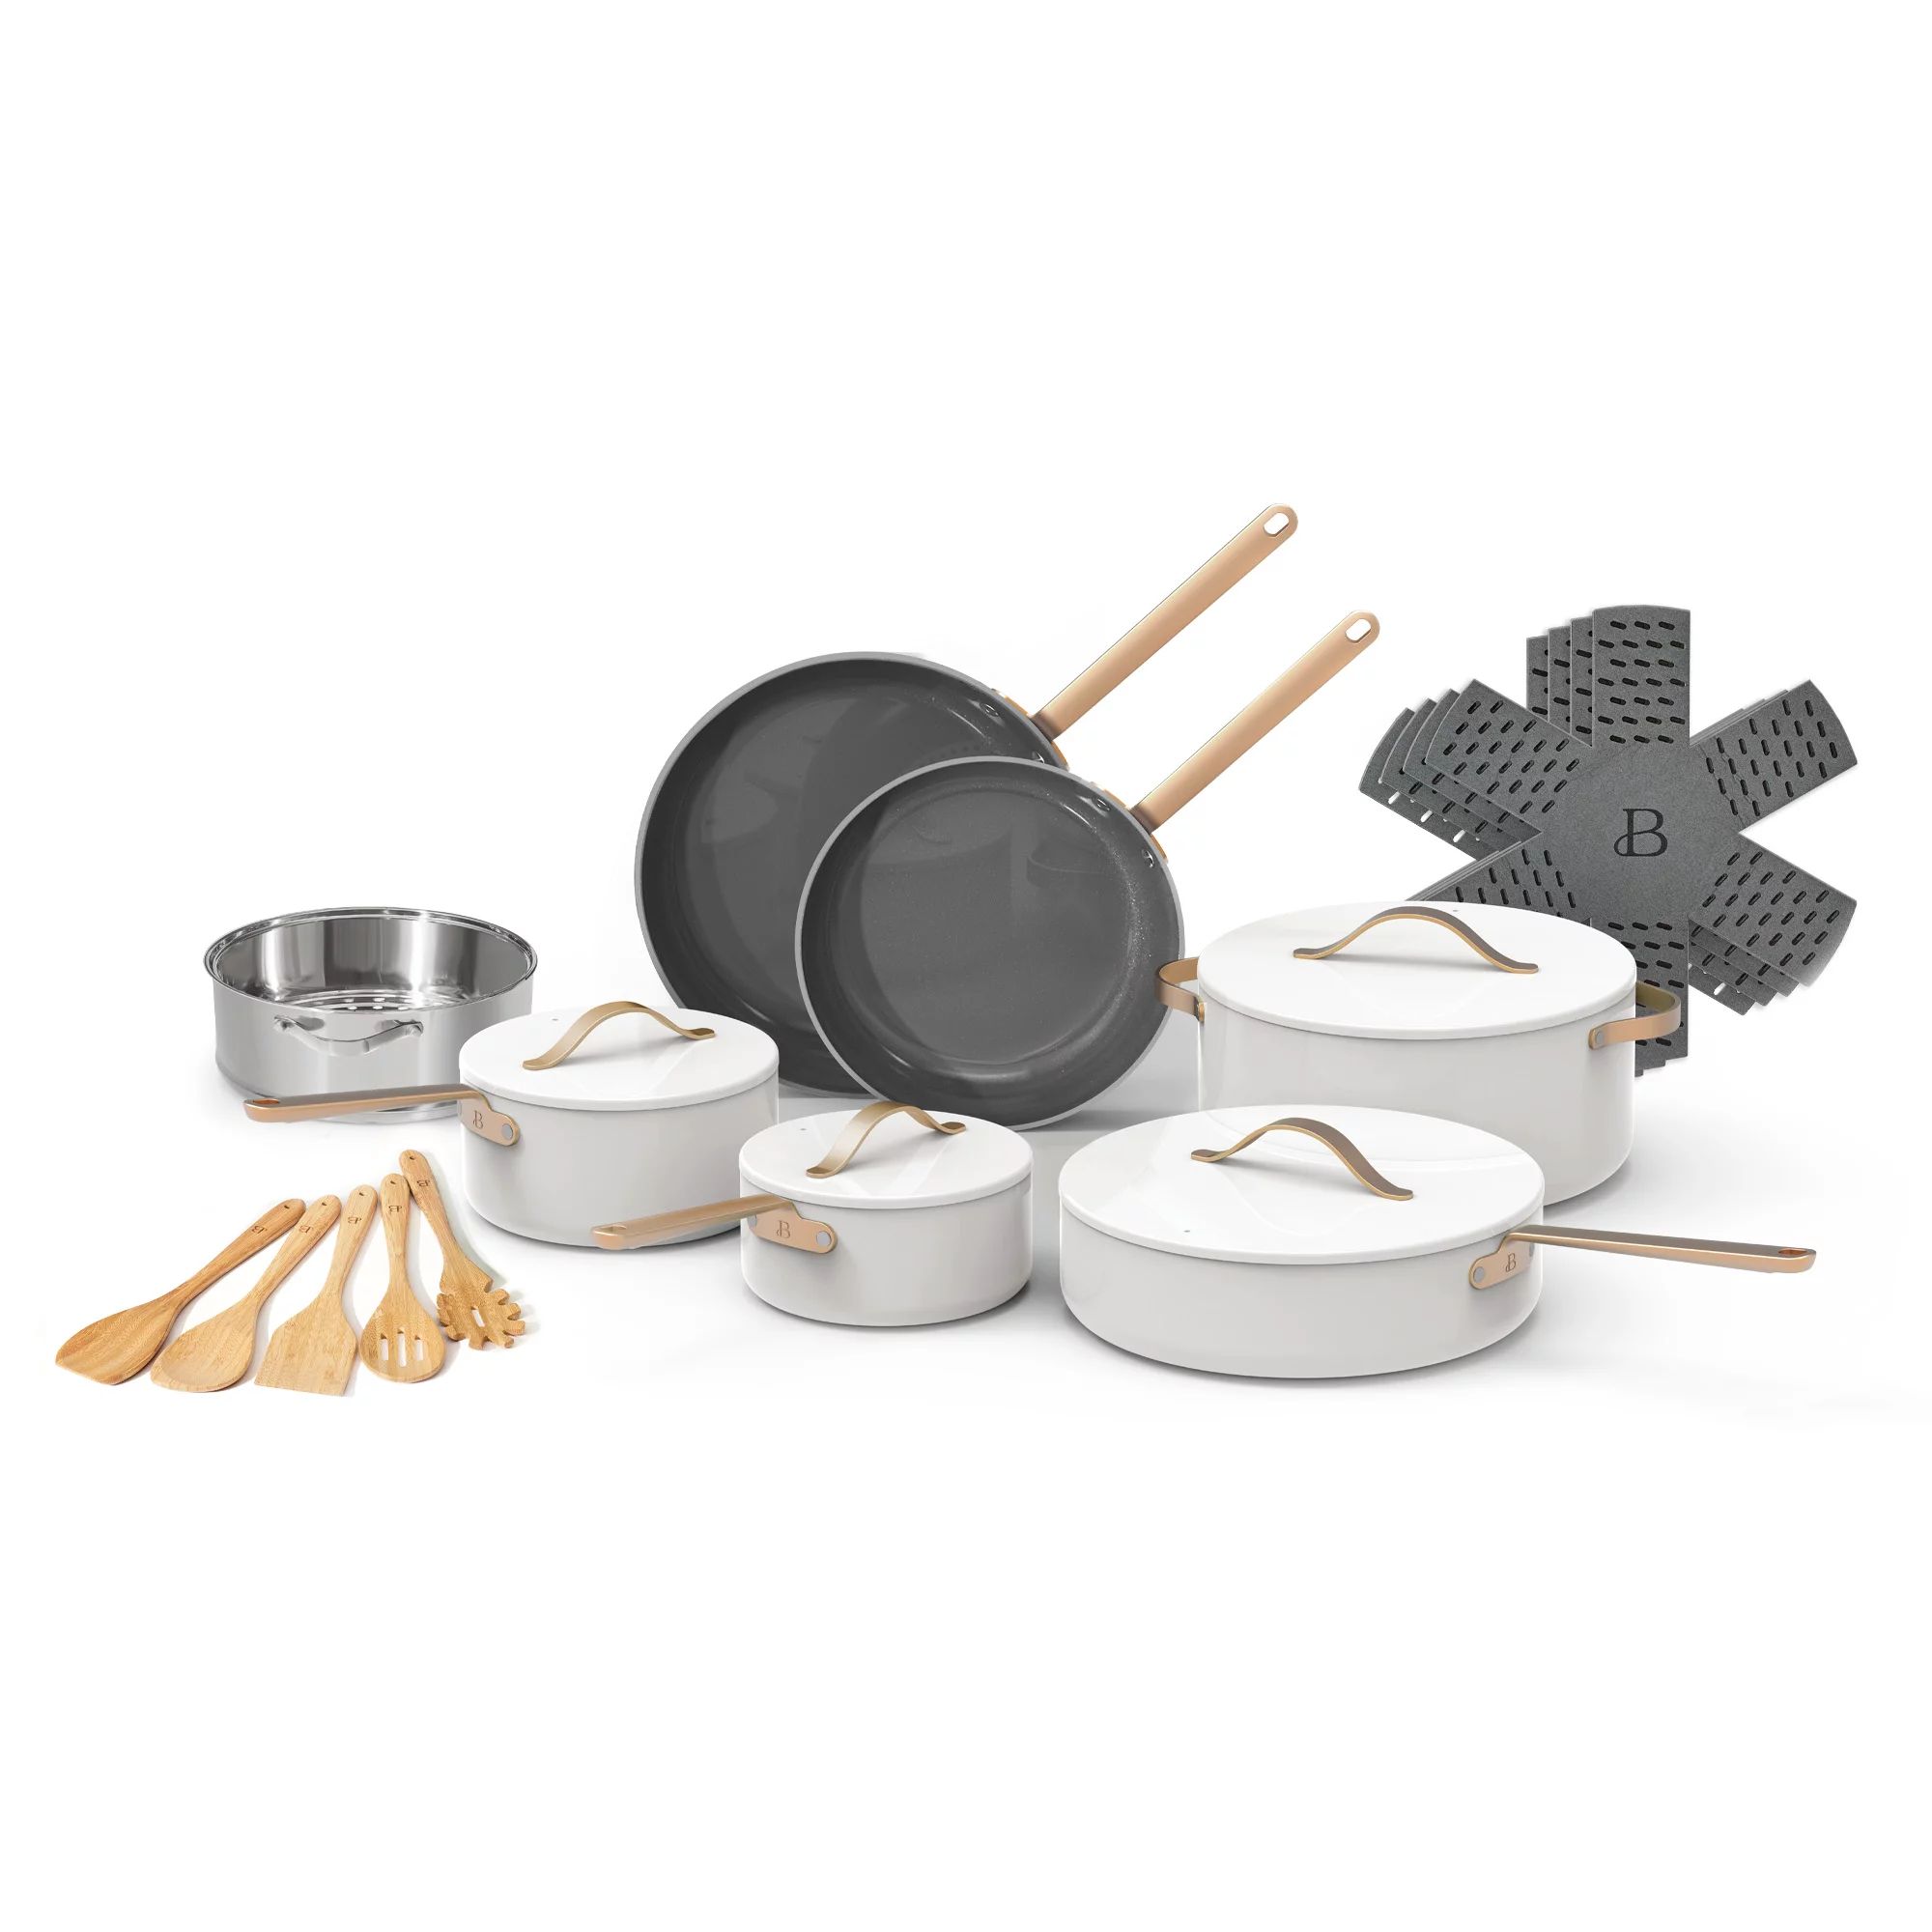 Beautiful 20pc Ceramic Non-Stick Cookware Set, White Icing by Drew Barrymore | Walmart (US)